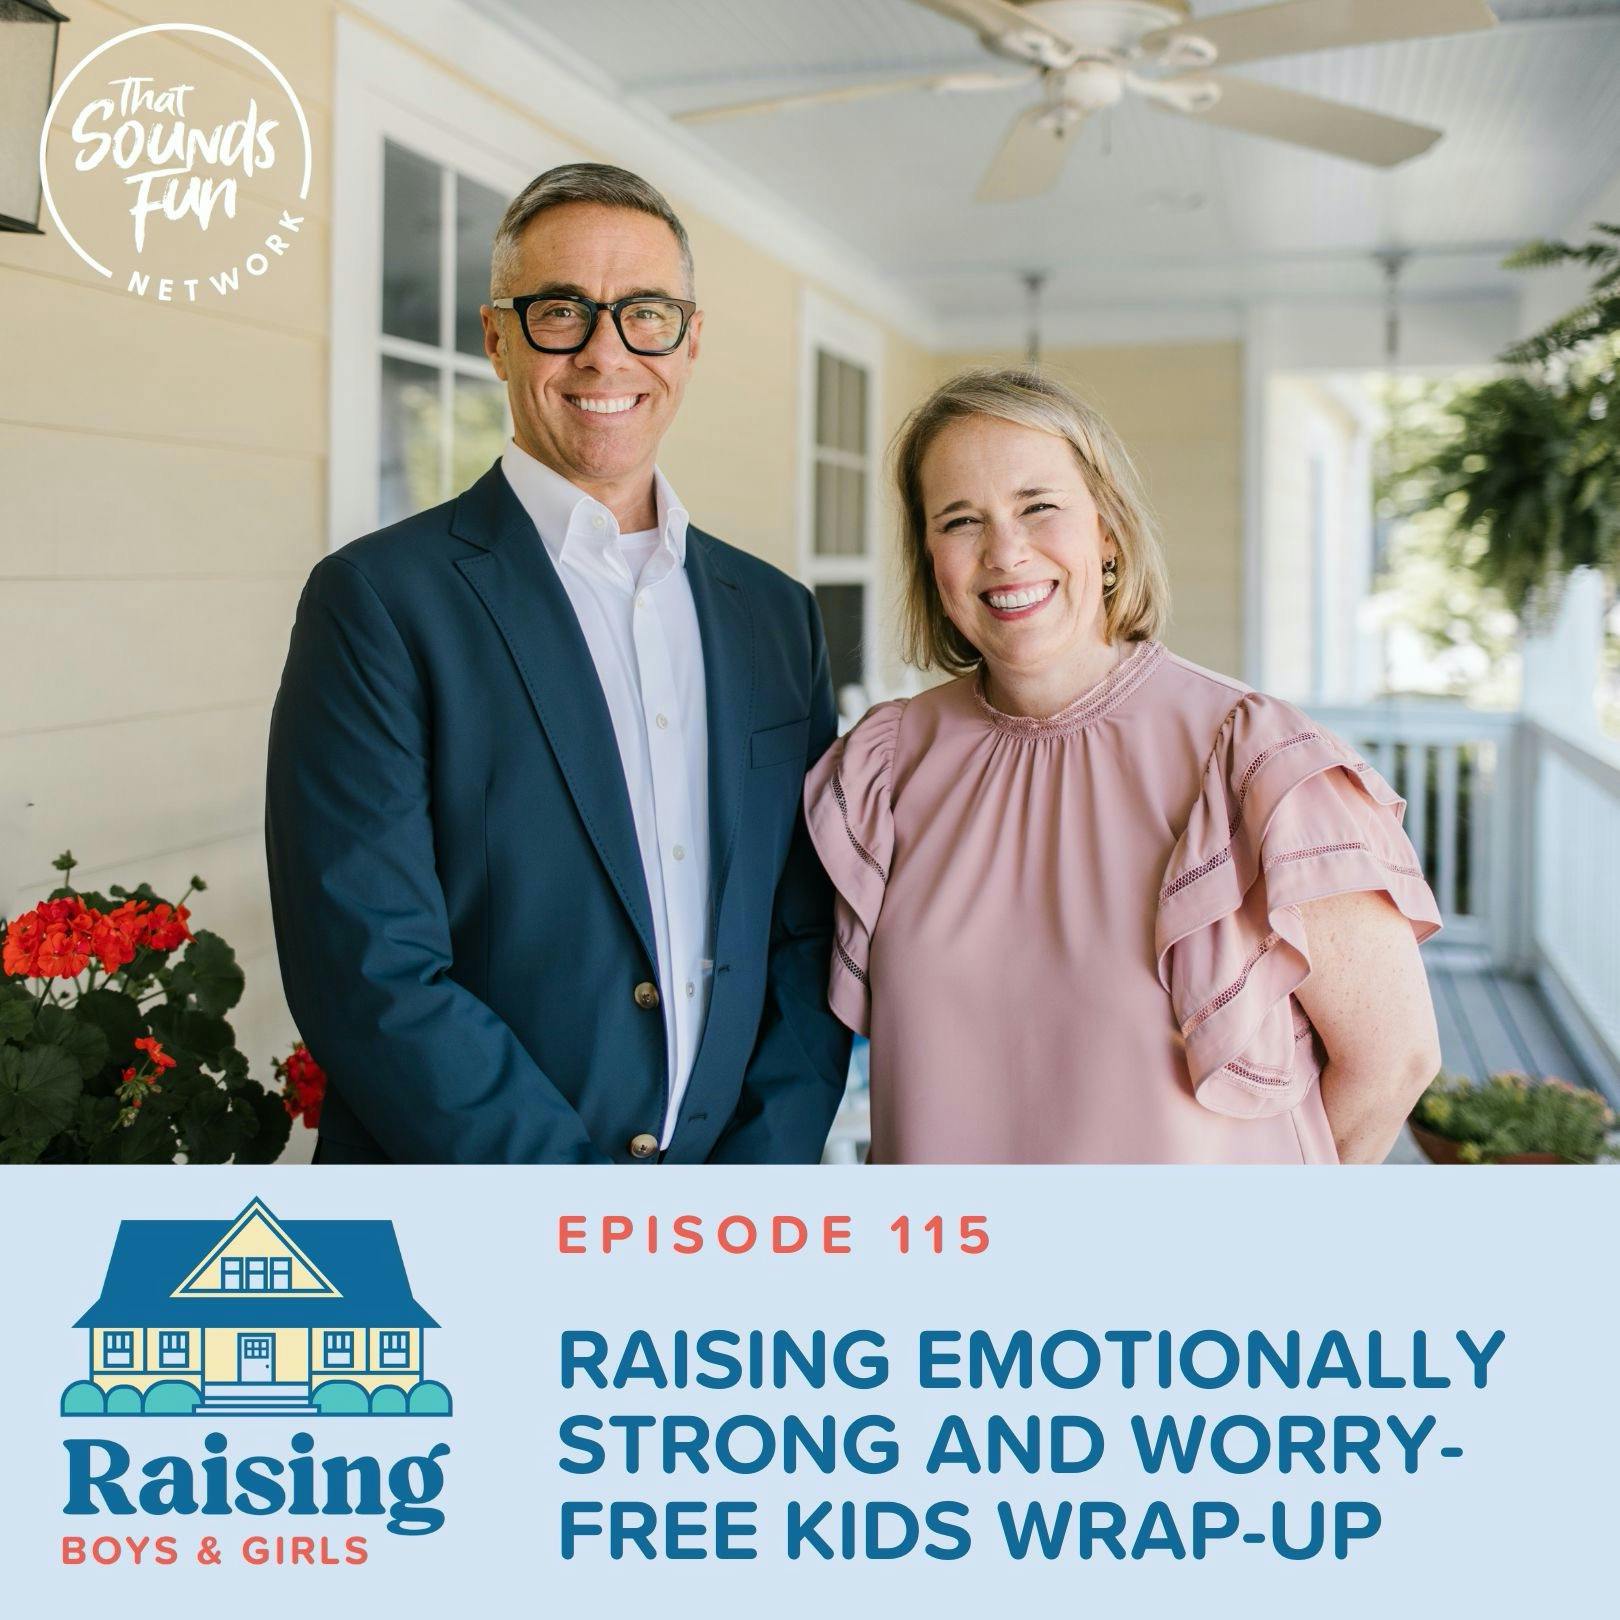 Episode 115: Raising Emotionally Strong and Worry-free Kids Wrap-Up